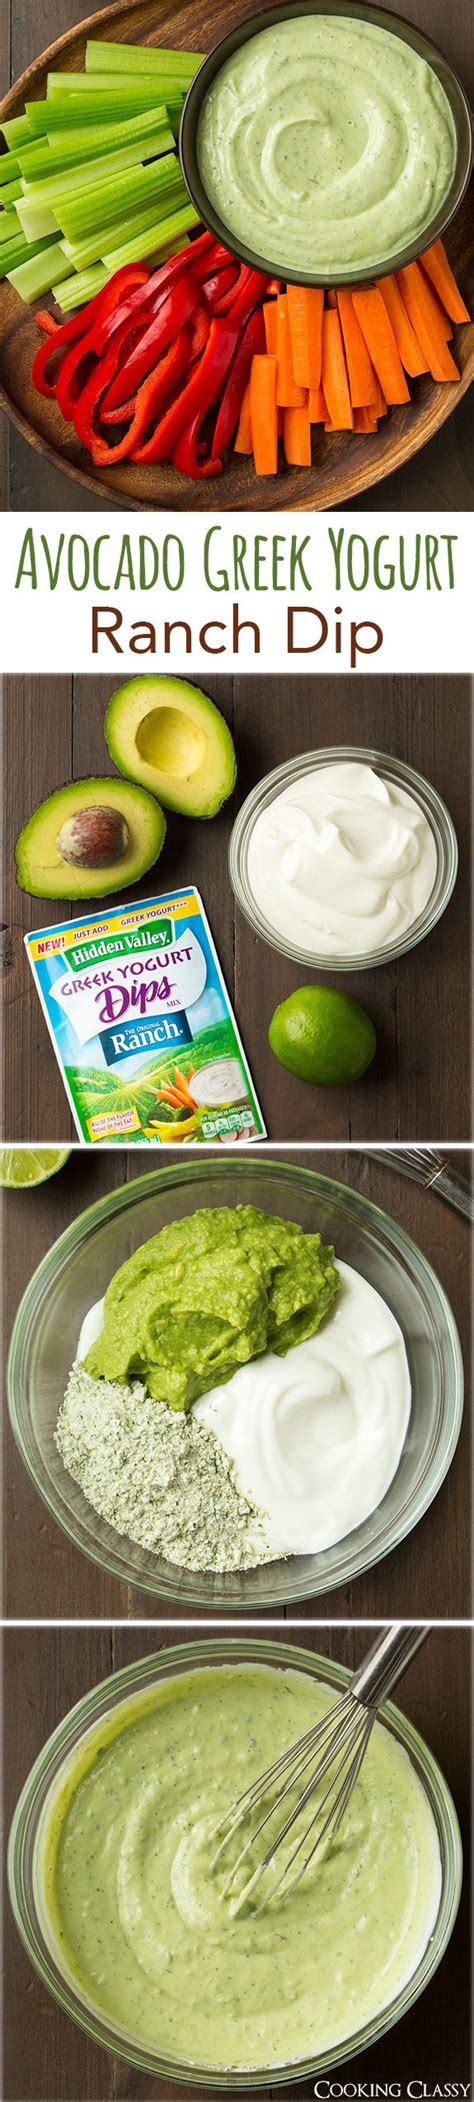 Avocado Greek Yogurt Ranch Dip Only 4 Ingredients And A Breeze To